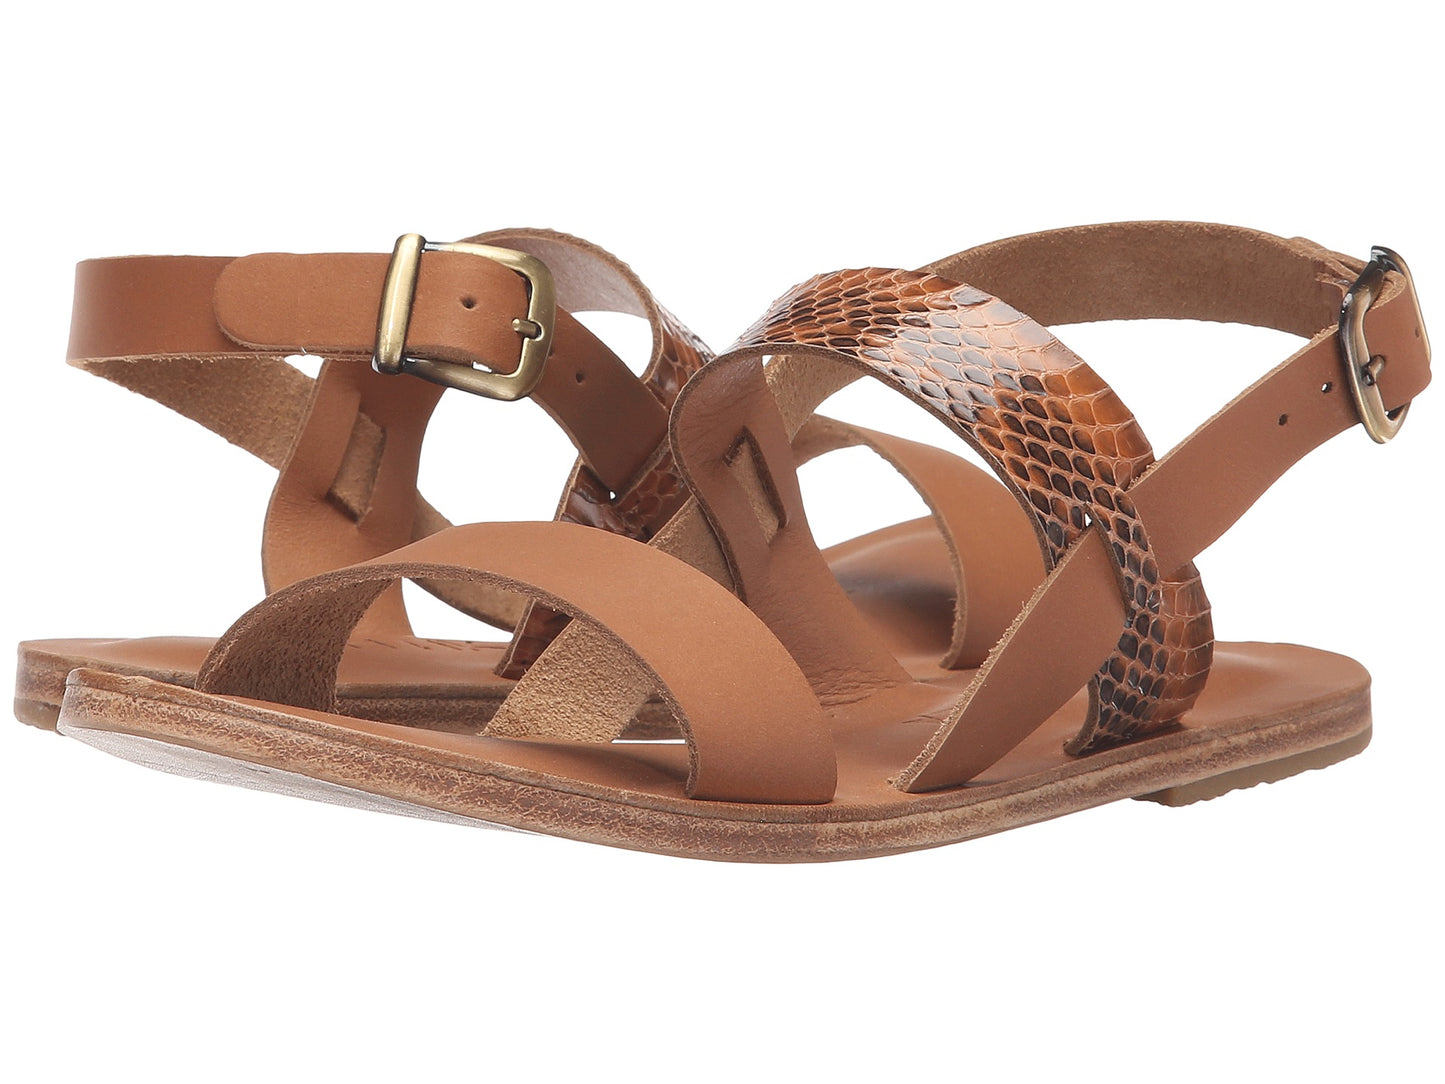 Abbot Kinney Blvd tan snake skin, handmade leather buckle sandals with front loop - Side View